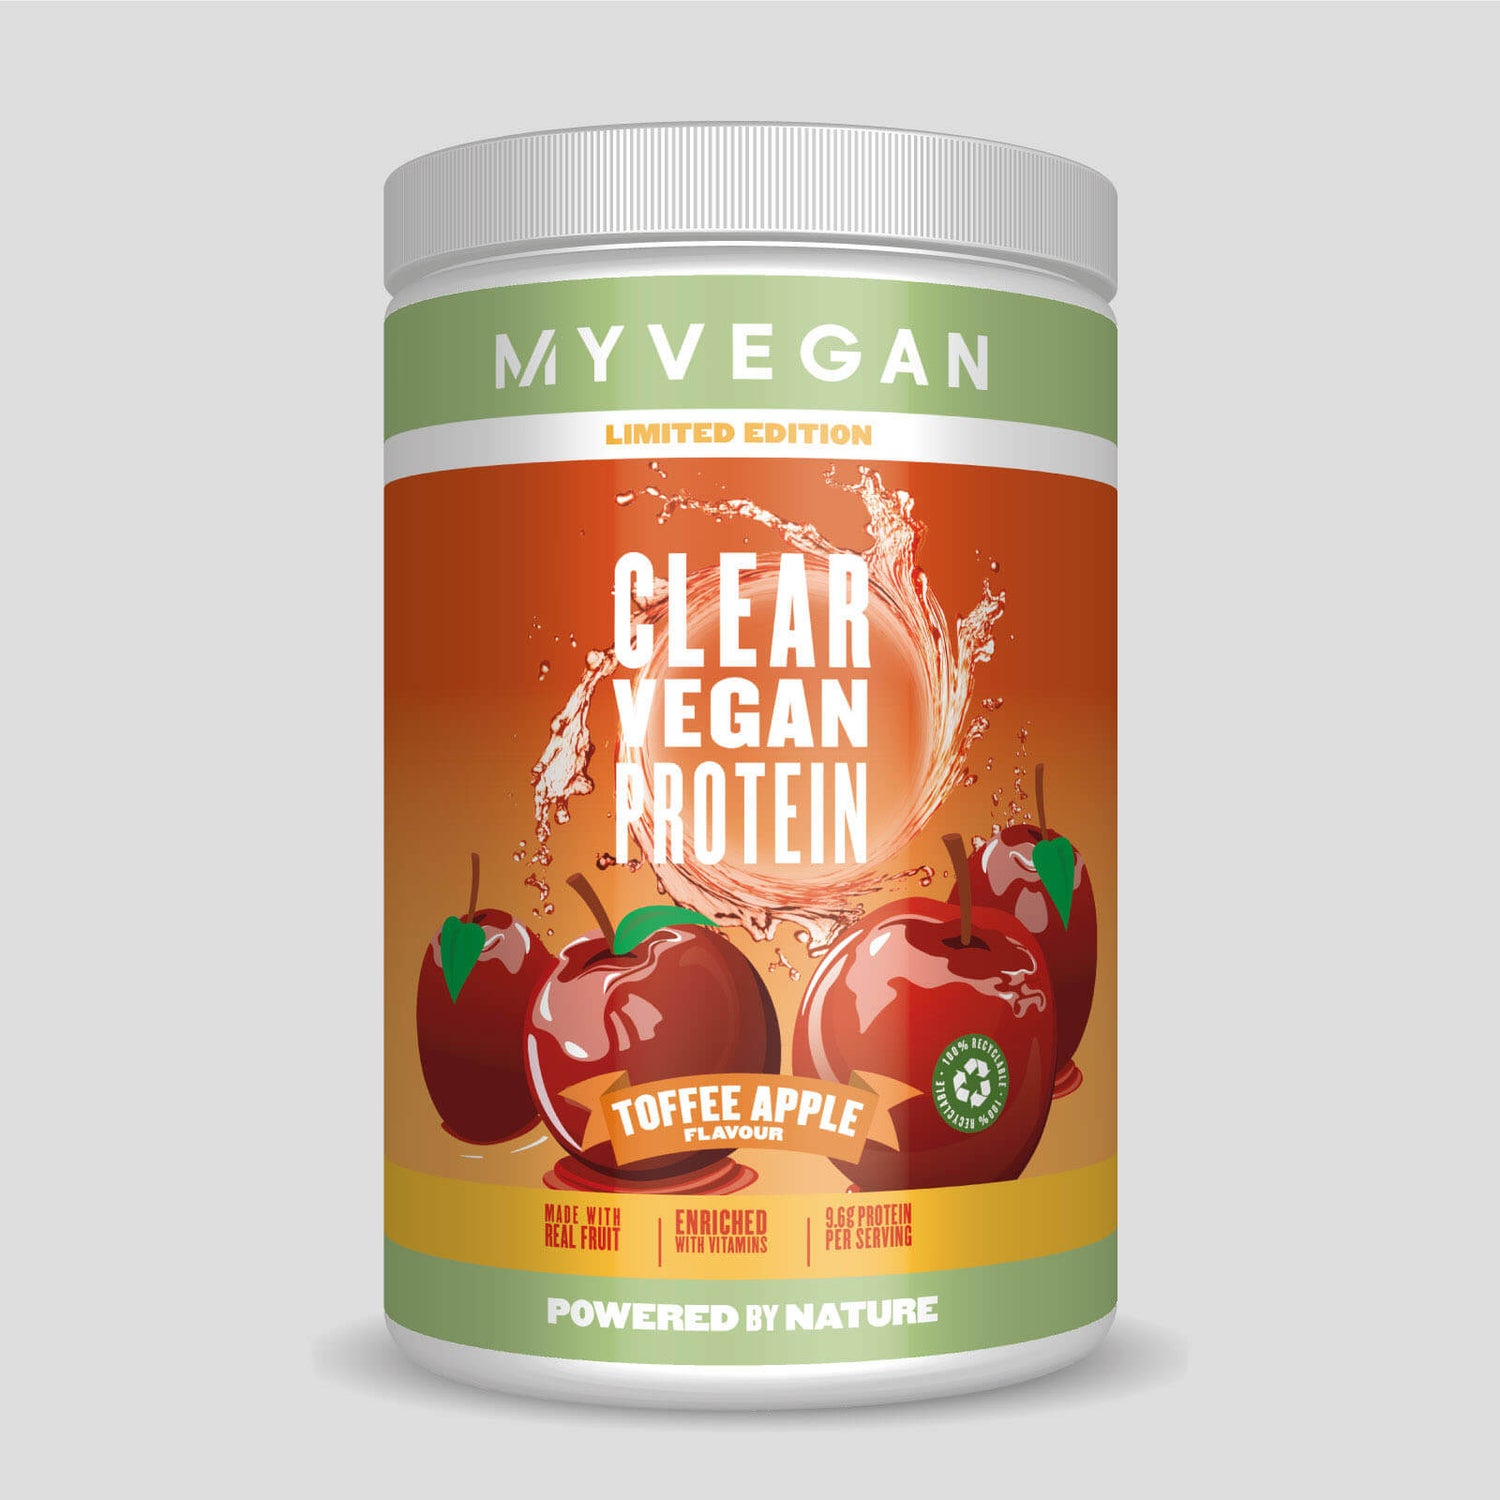 Clear Vegan Protein – Toffee Apple flavour